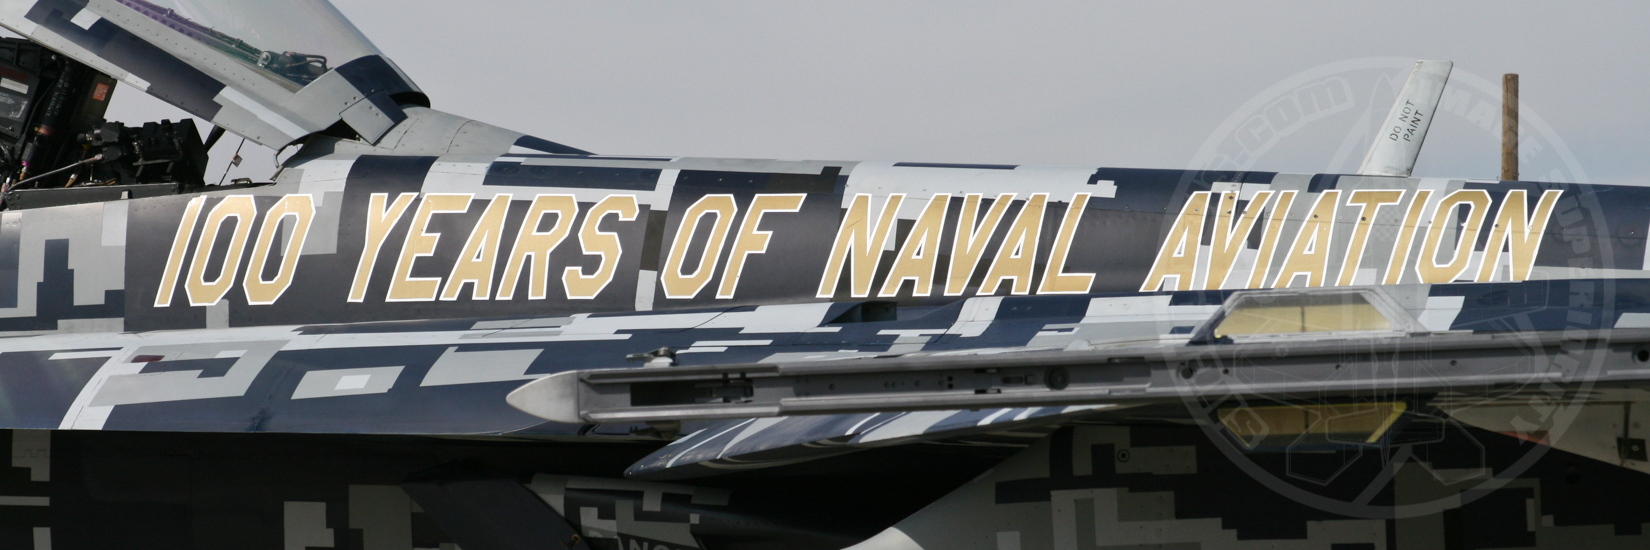 100 Years of Naval Aviation